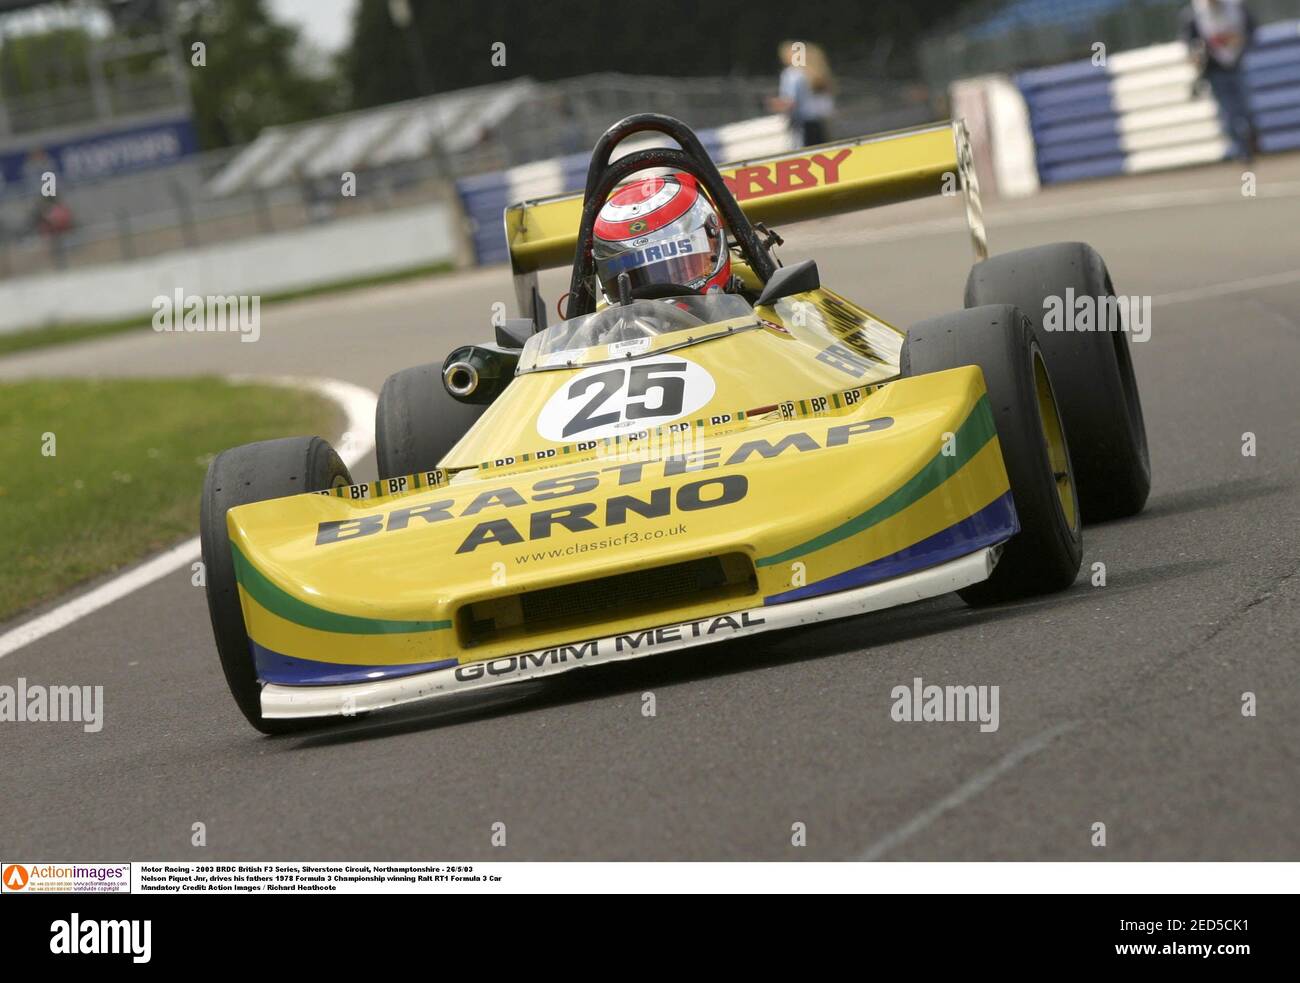 Formula 3 Car High Resolution Stock Photography and Images - Alamy